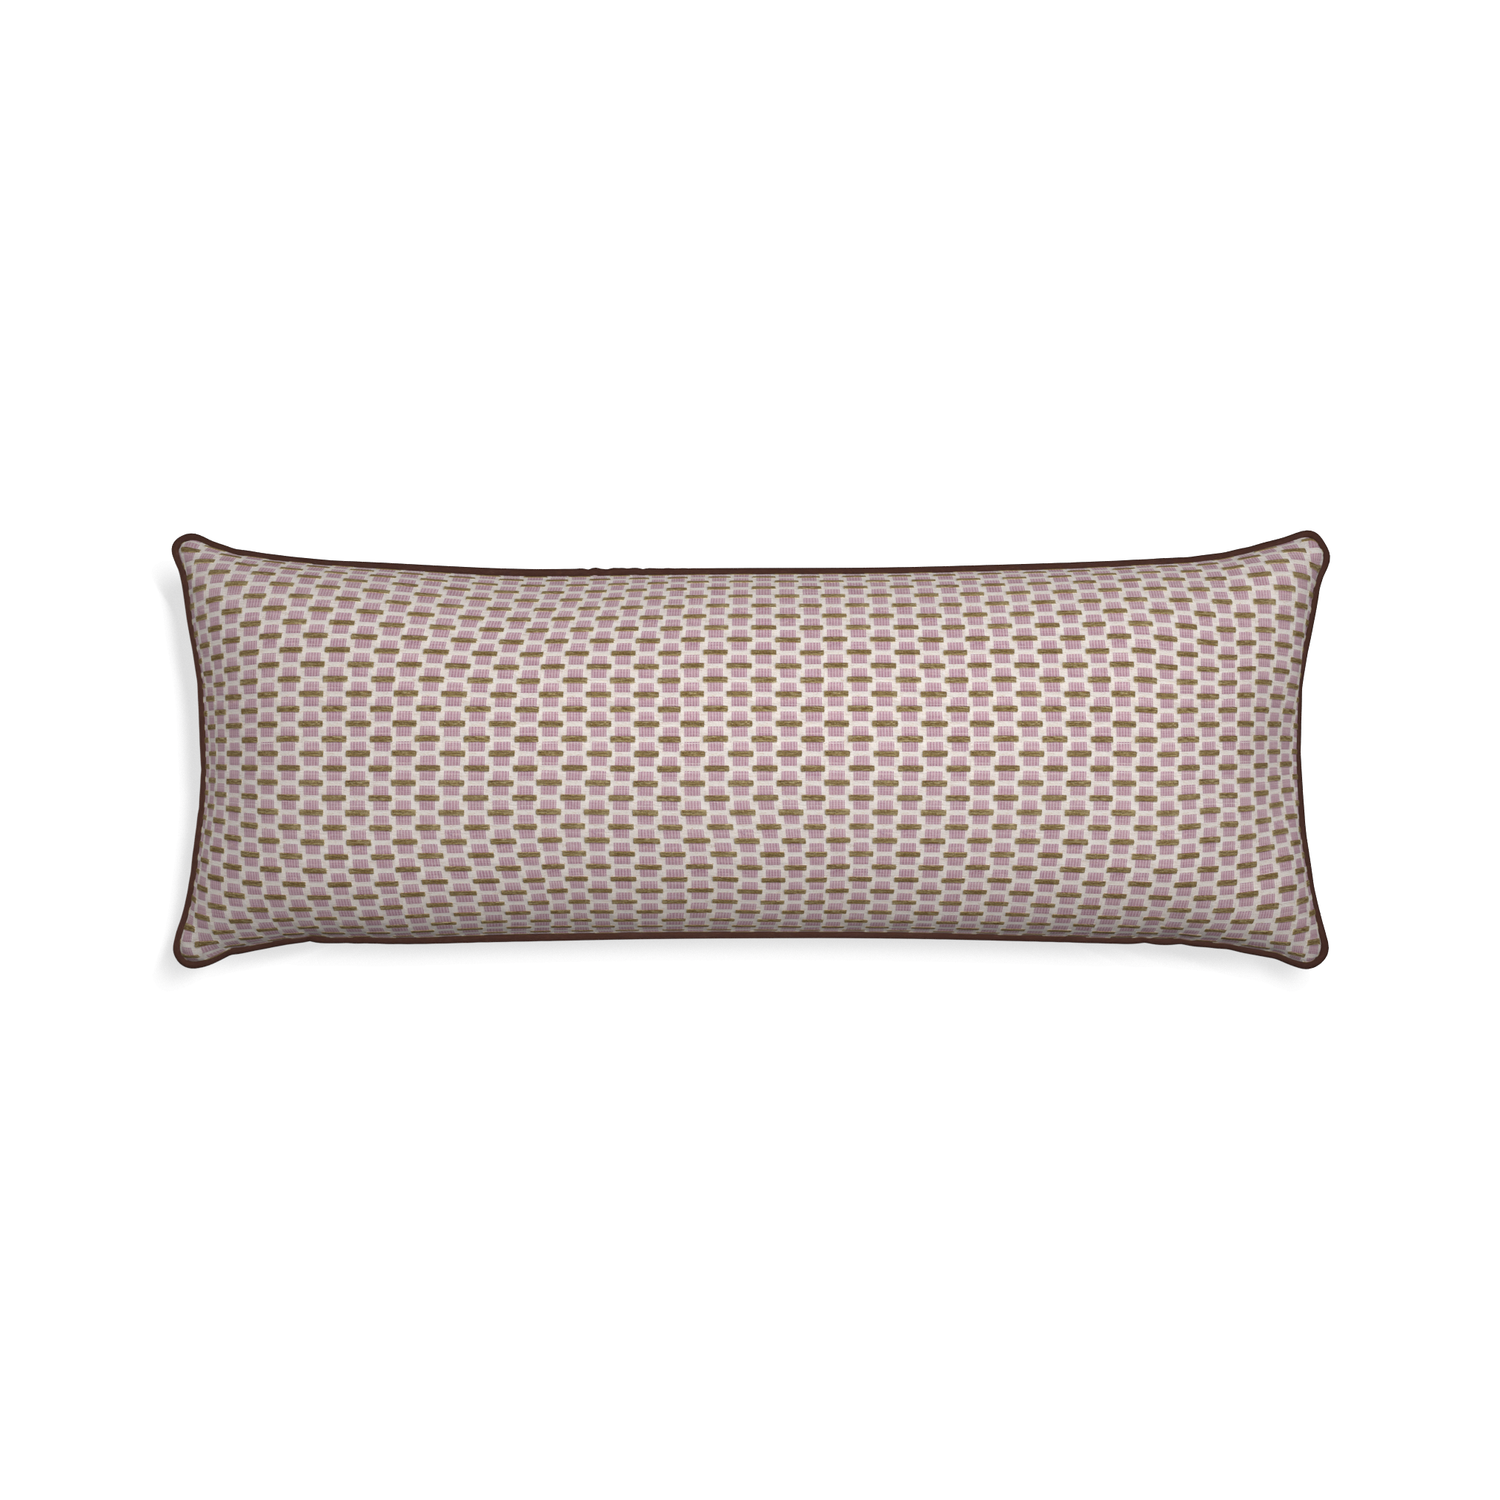 Xl-lumbar willow orchid custom pink geometric chenillepillow with w piping on white background